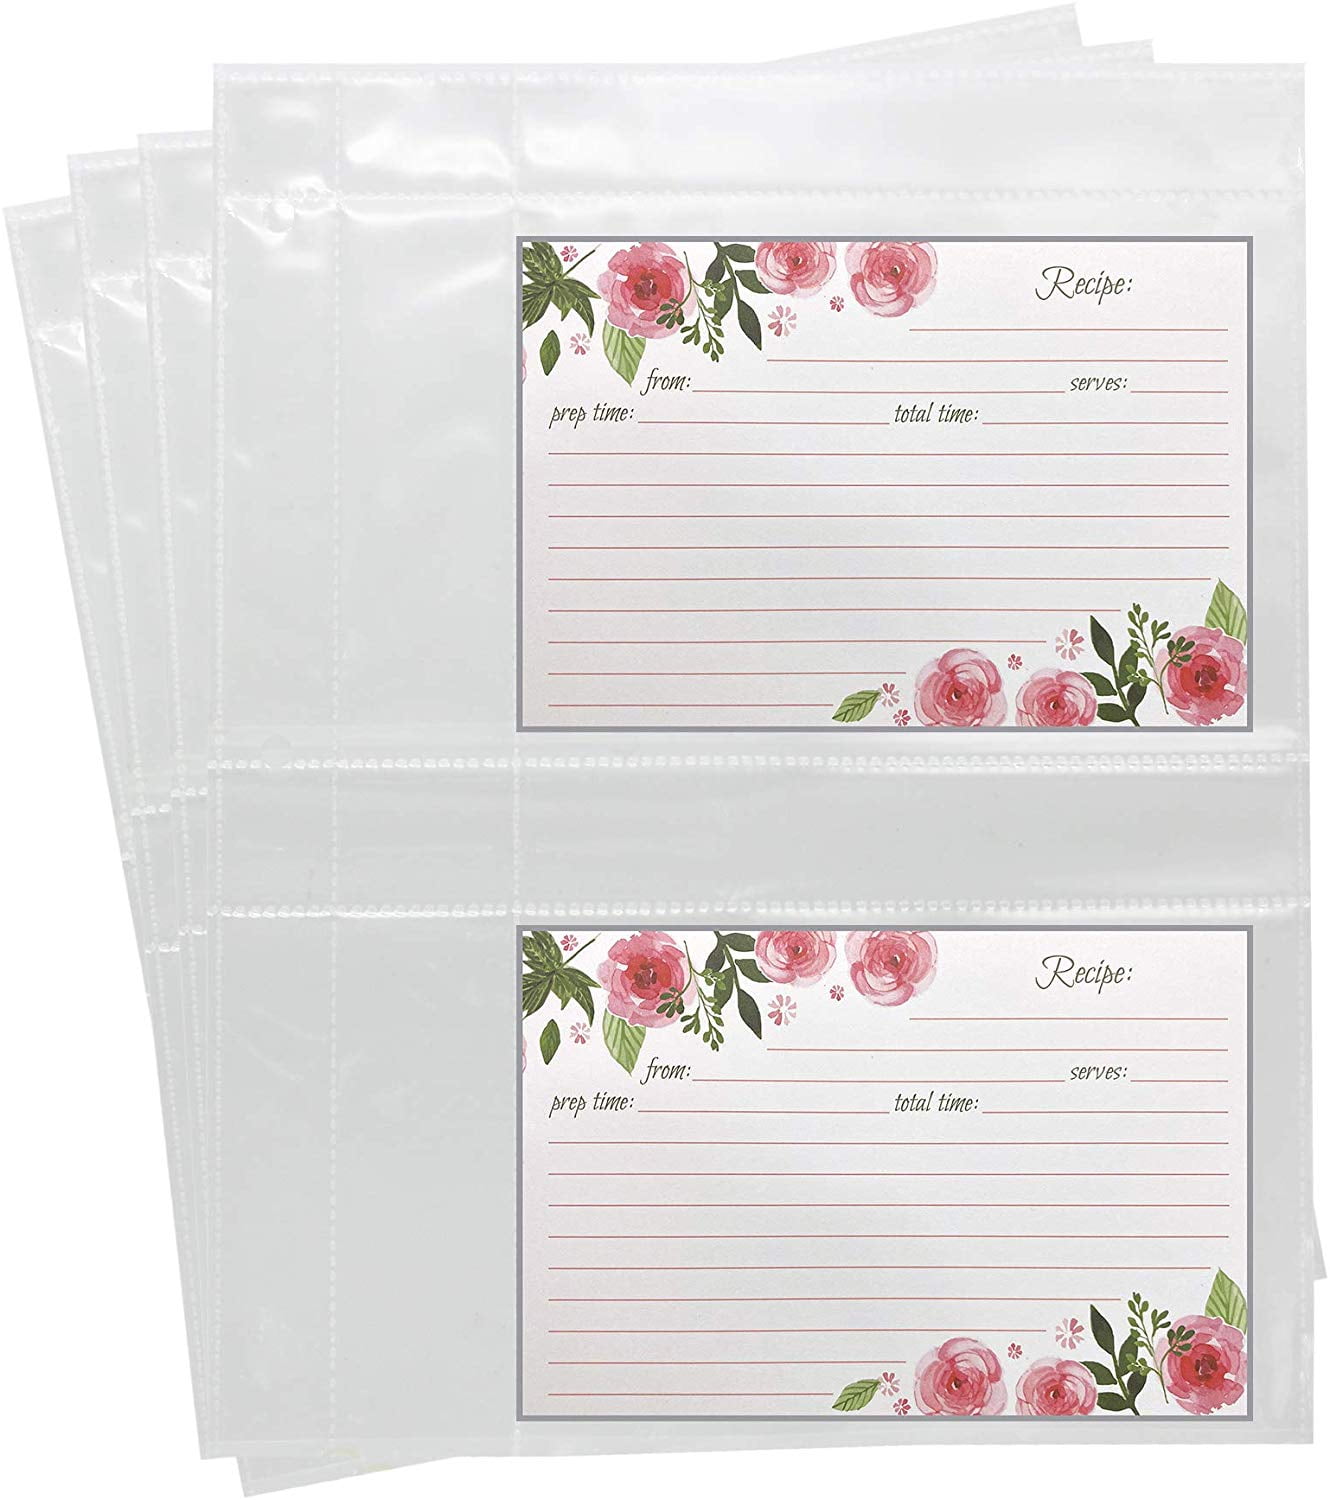 MaxGear Recipe Card Protectors 4 x 6 inch Pockets 60 Pack Left Side Loading Recipe Card Sleeves Recipe Card Page Protectors Recipe Card Holder 2 Pocket Photo Sleeves for 3 Ring Binder 